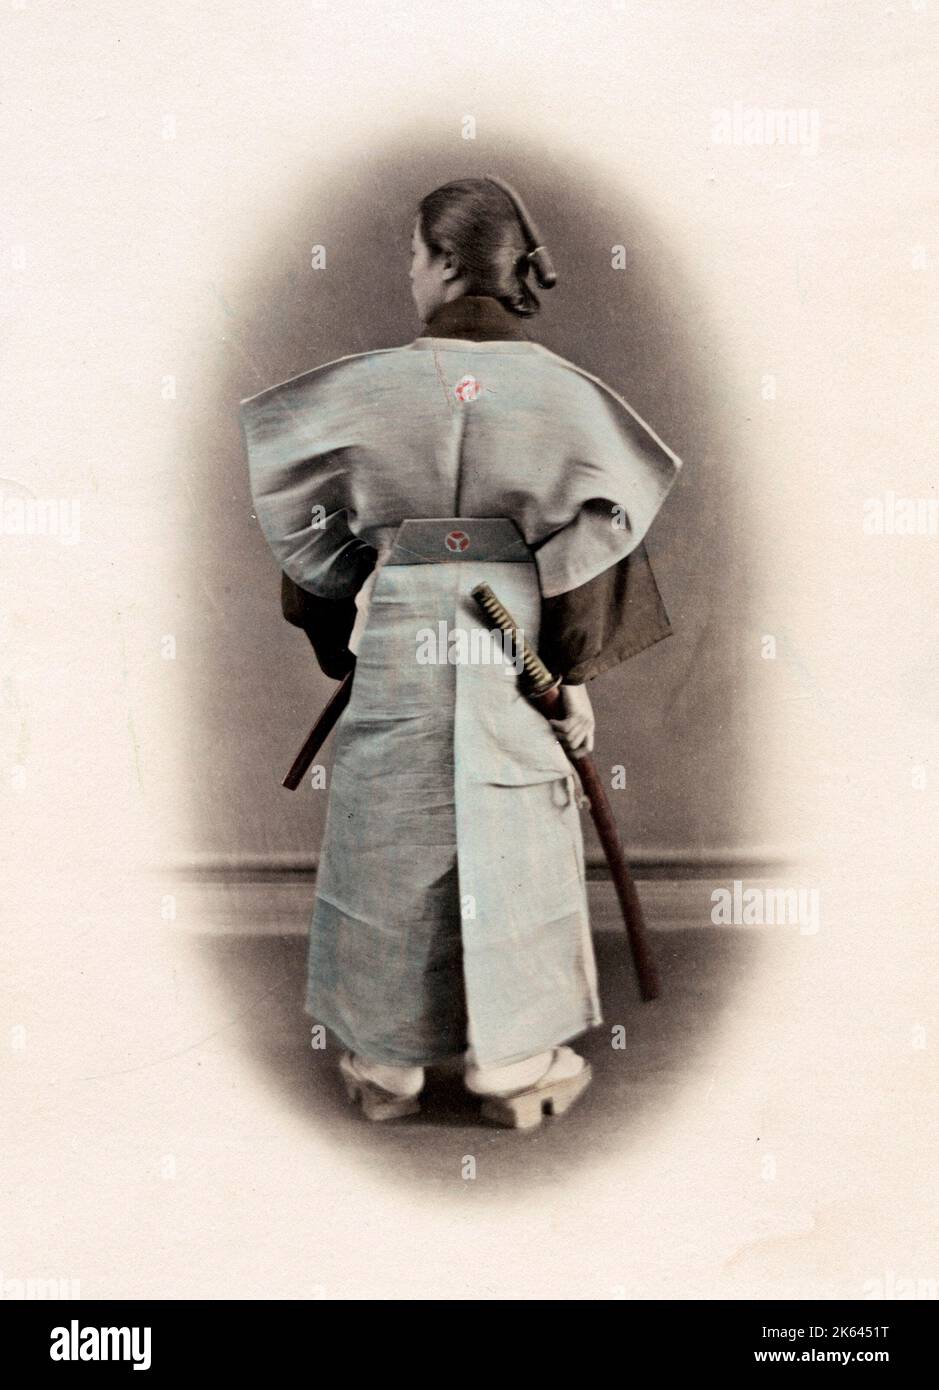 Late 19th century vintage photograph: Soldier with sword, Japan. Stock Photo